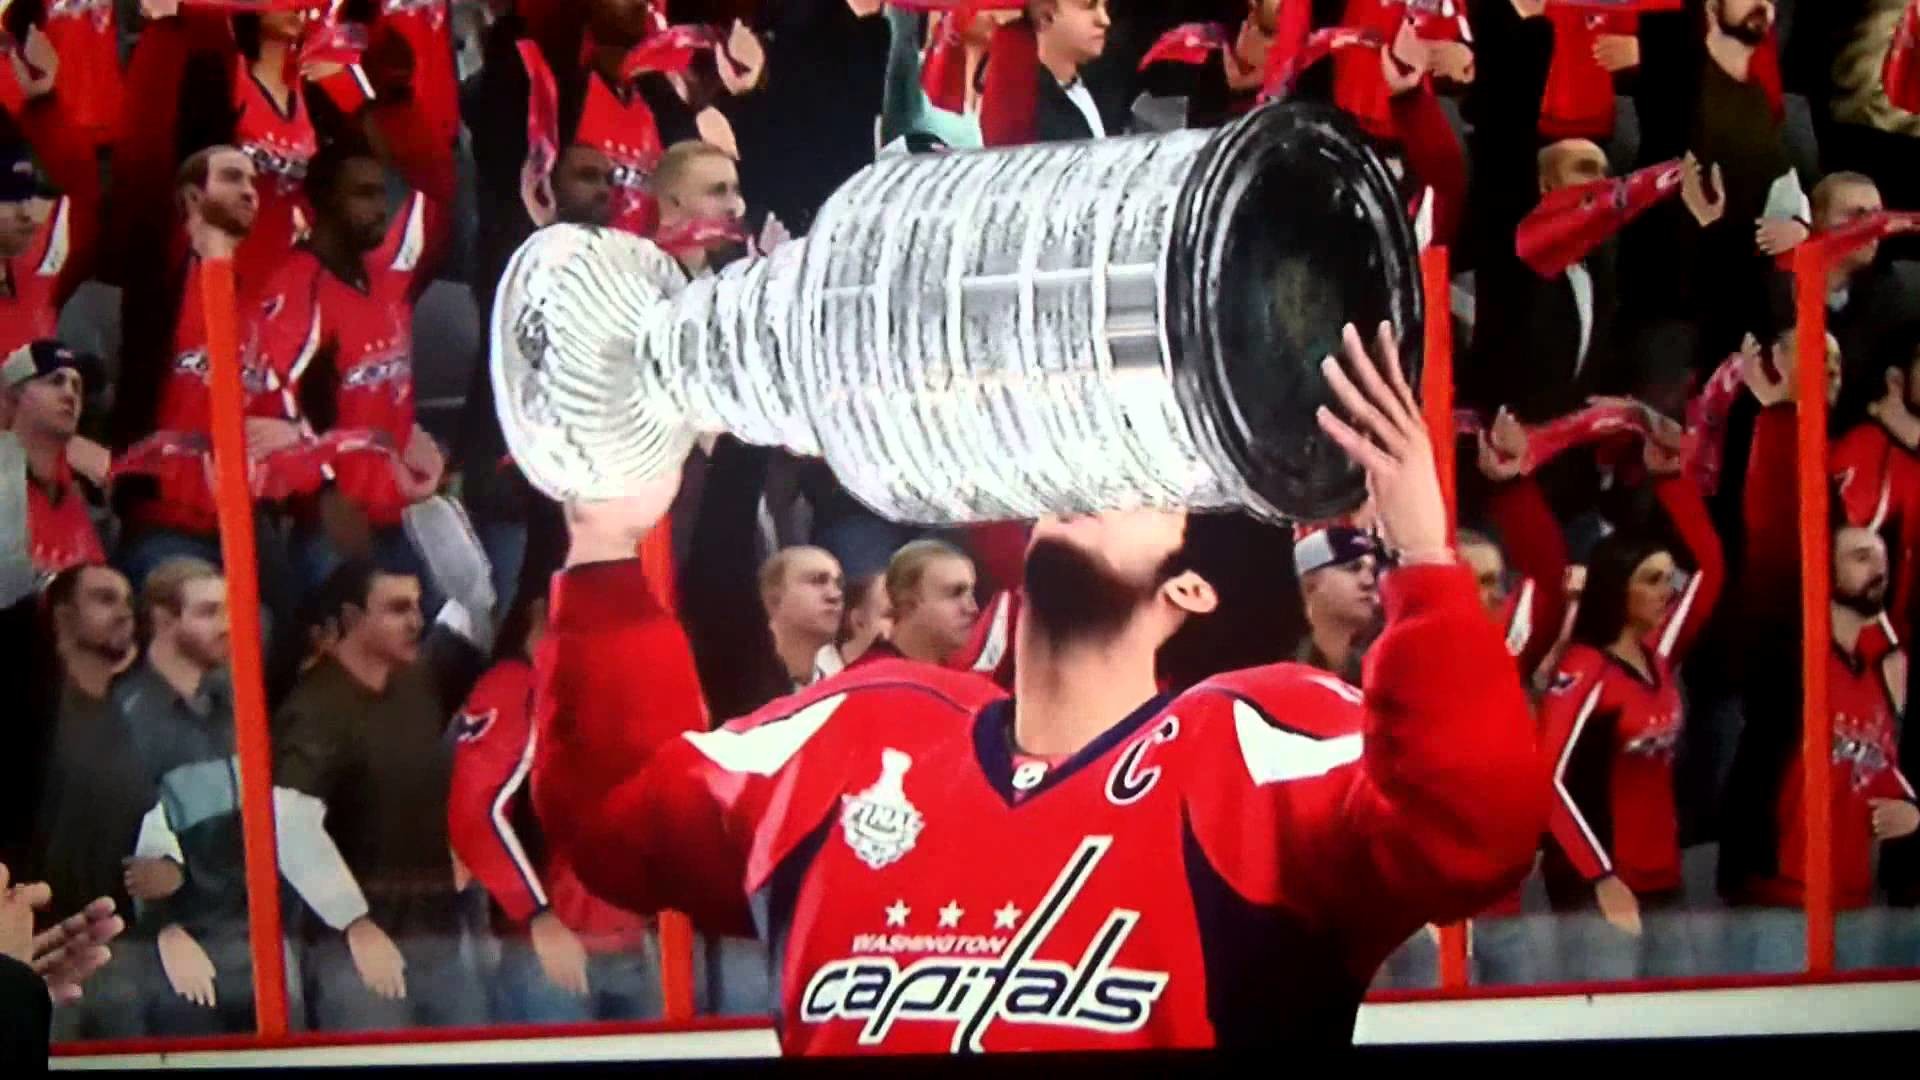 1920x1080 NHL 12 Washington Capitals win the Stanley Cup